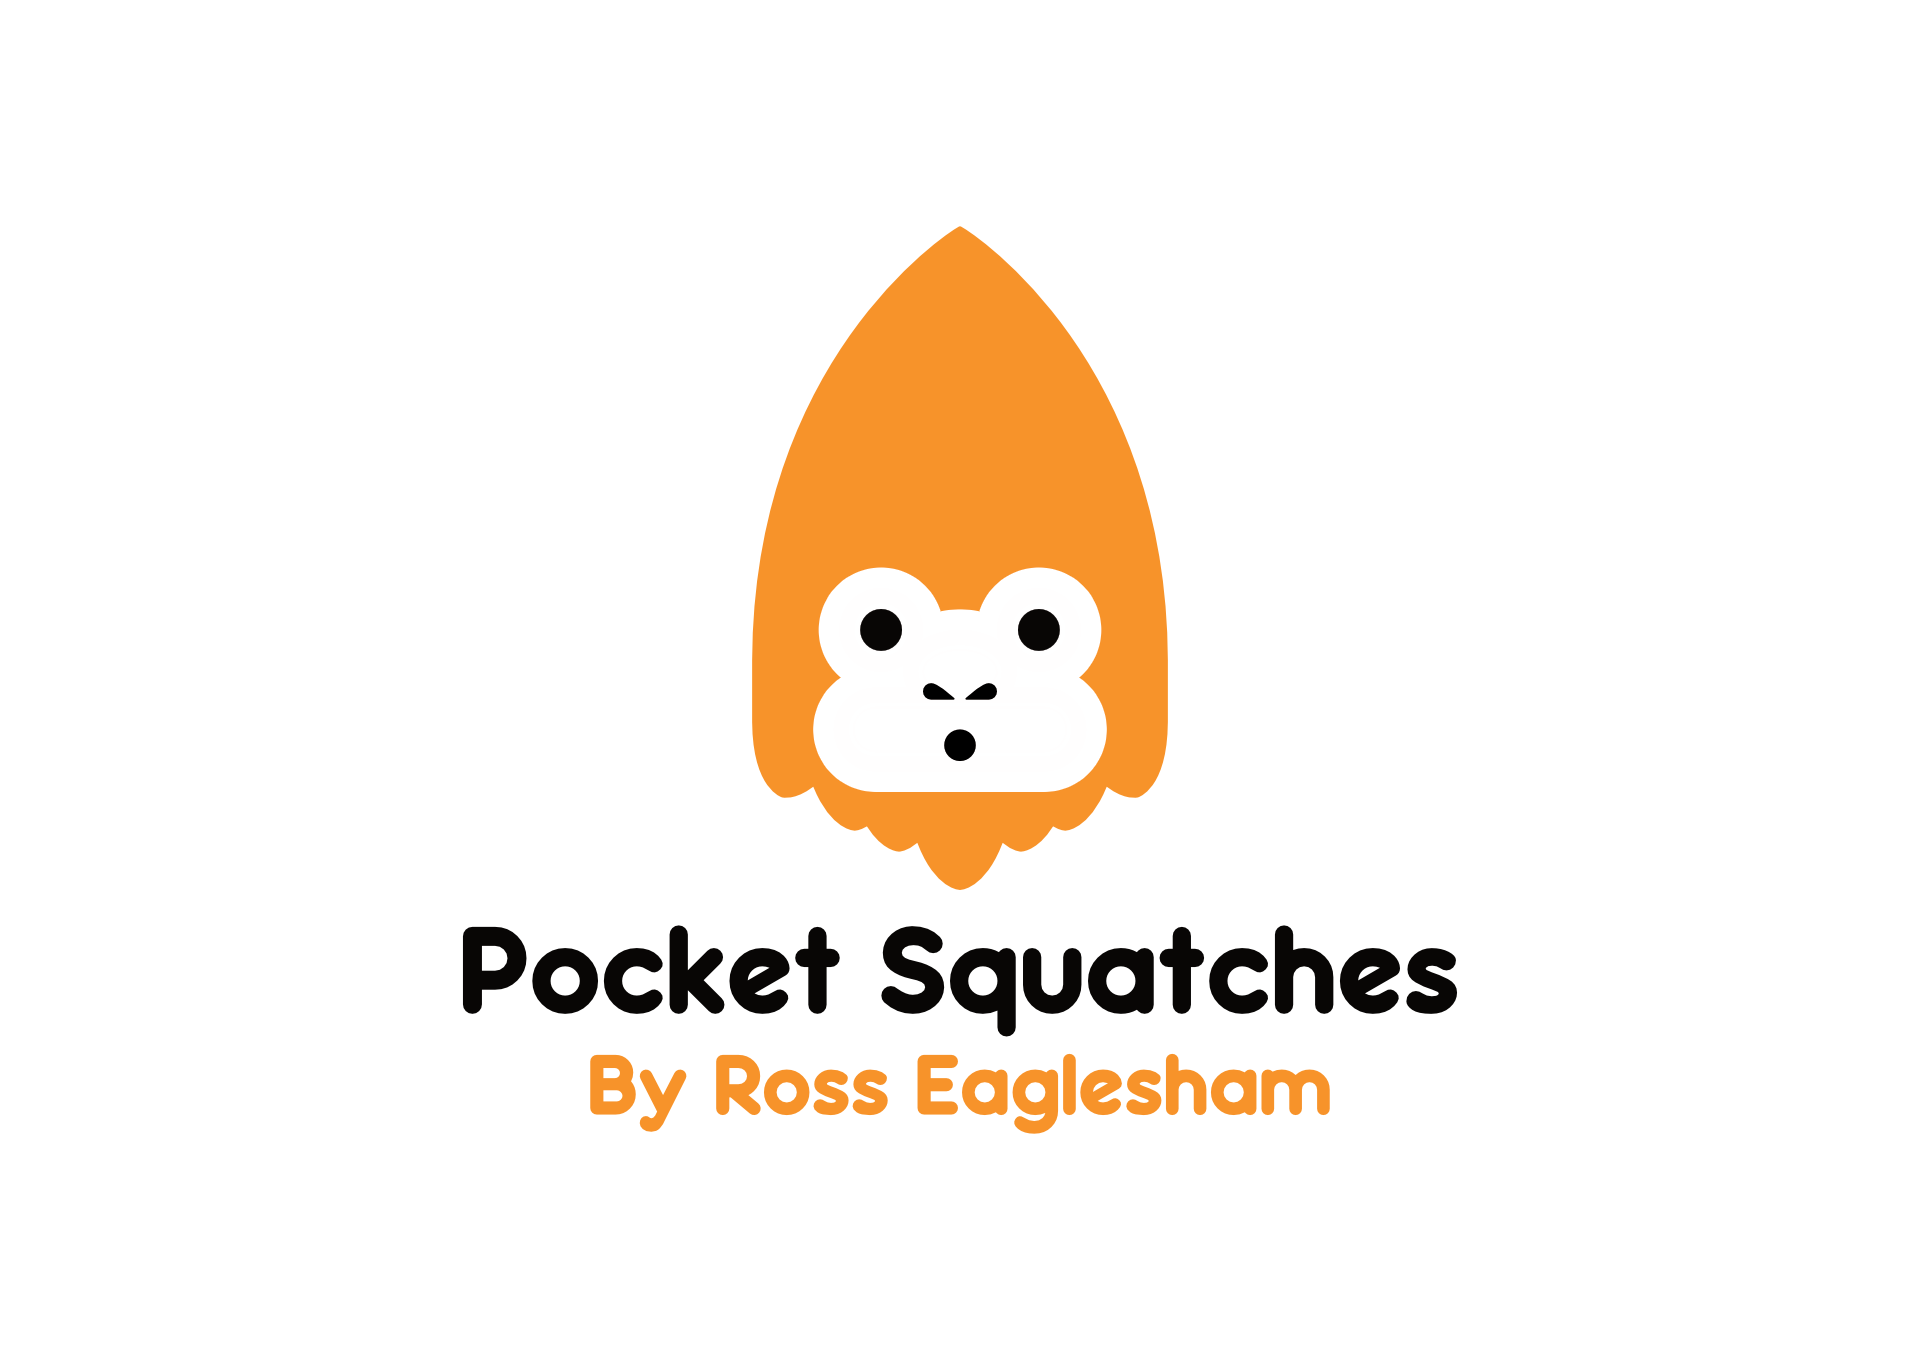 Pocket Squatches: A Chaotic Cryptid TTRPG